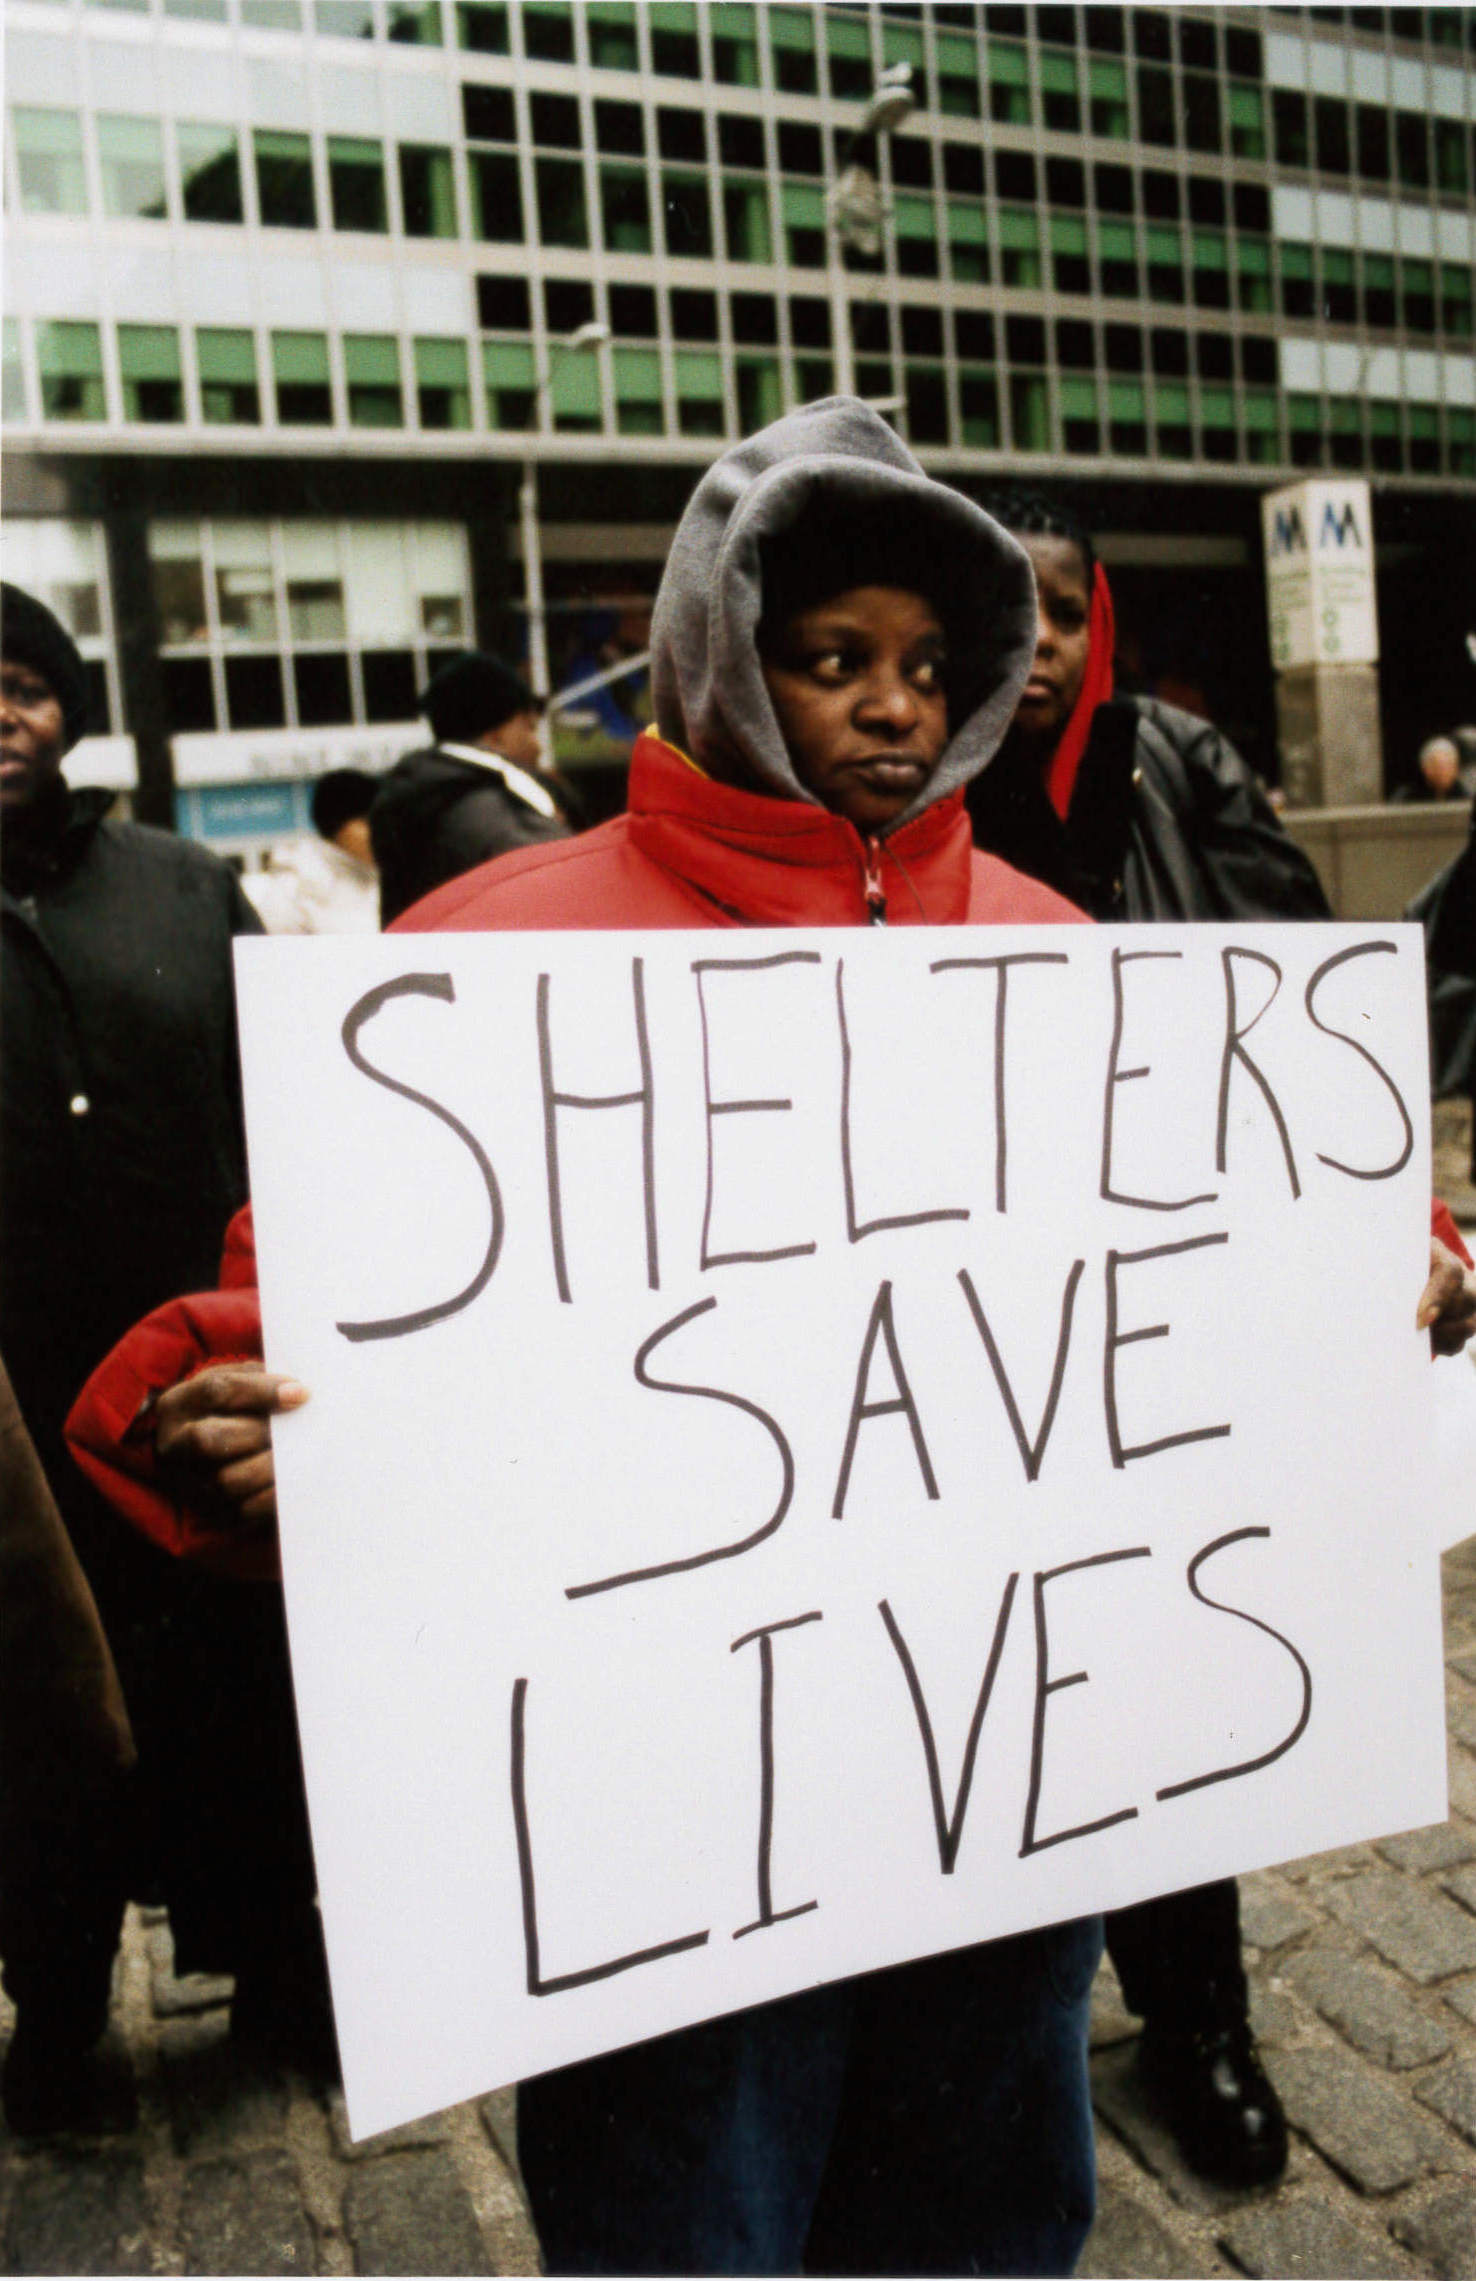 NYC Mayor Announces Agreement With The Legal Aid Society In Callahan ‘Right To Shelter’